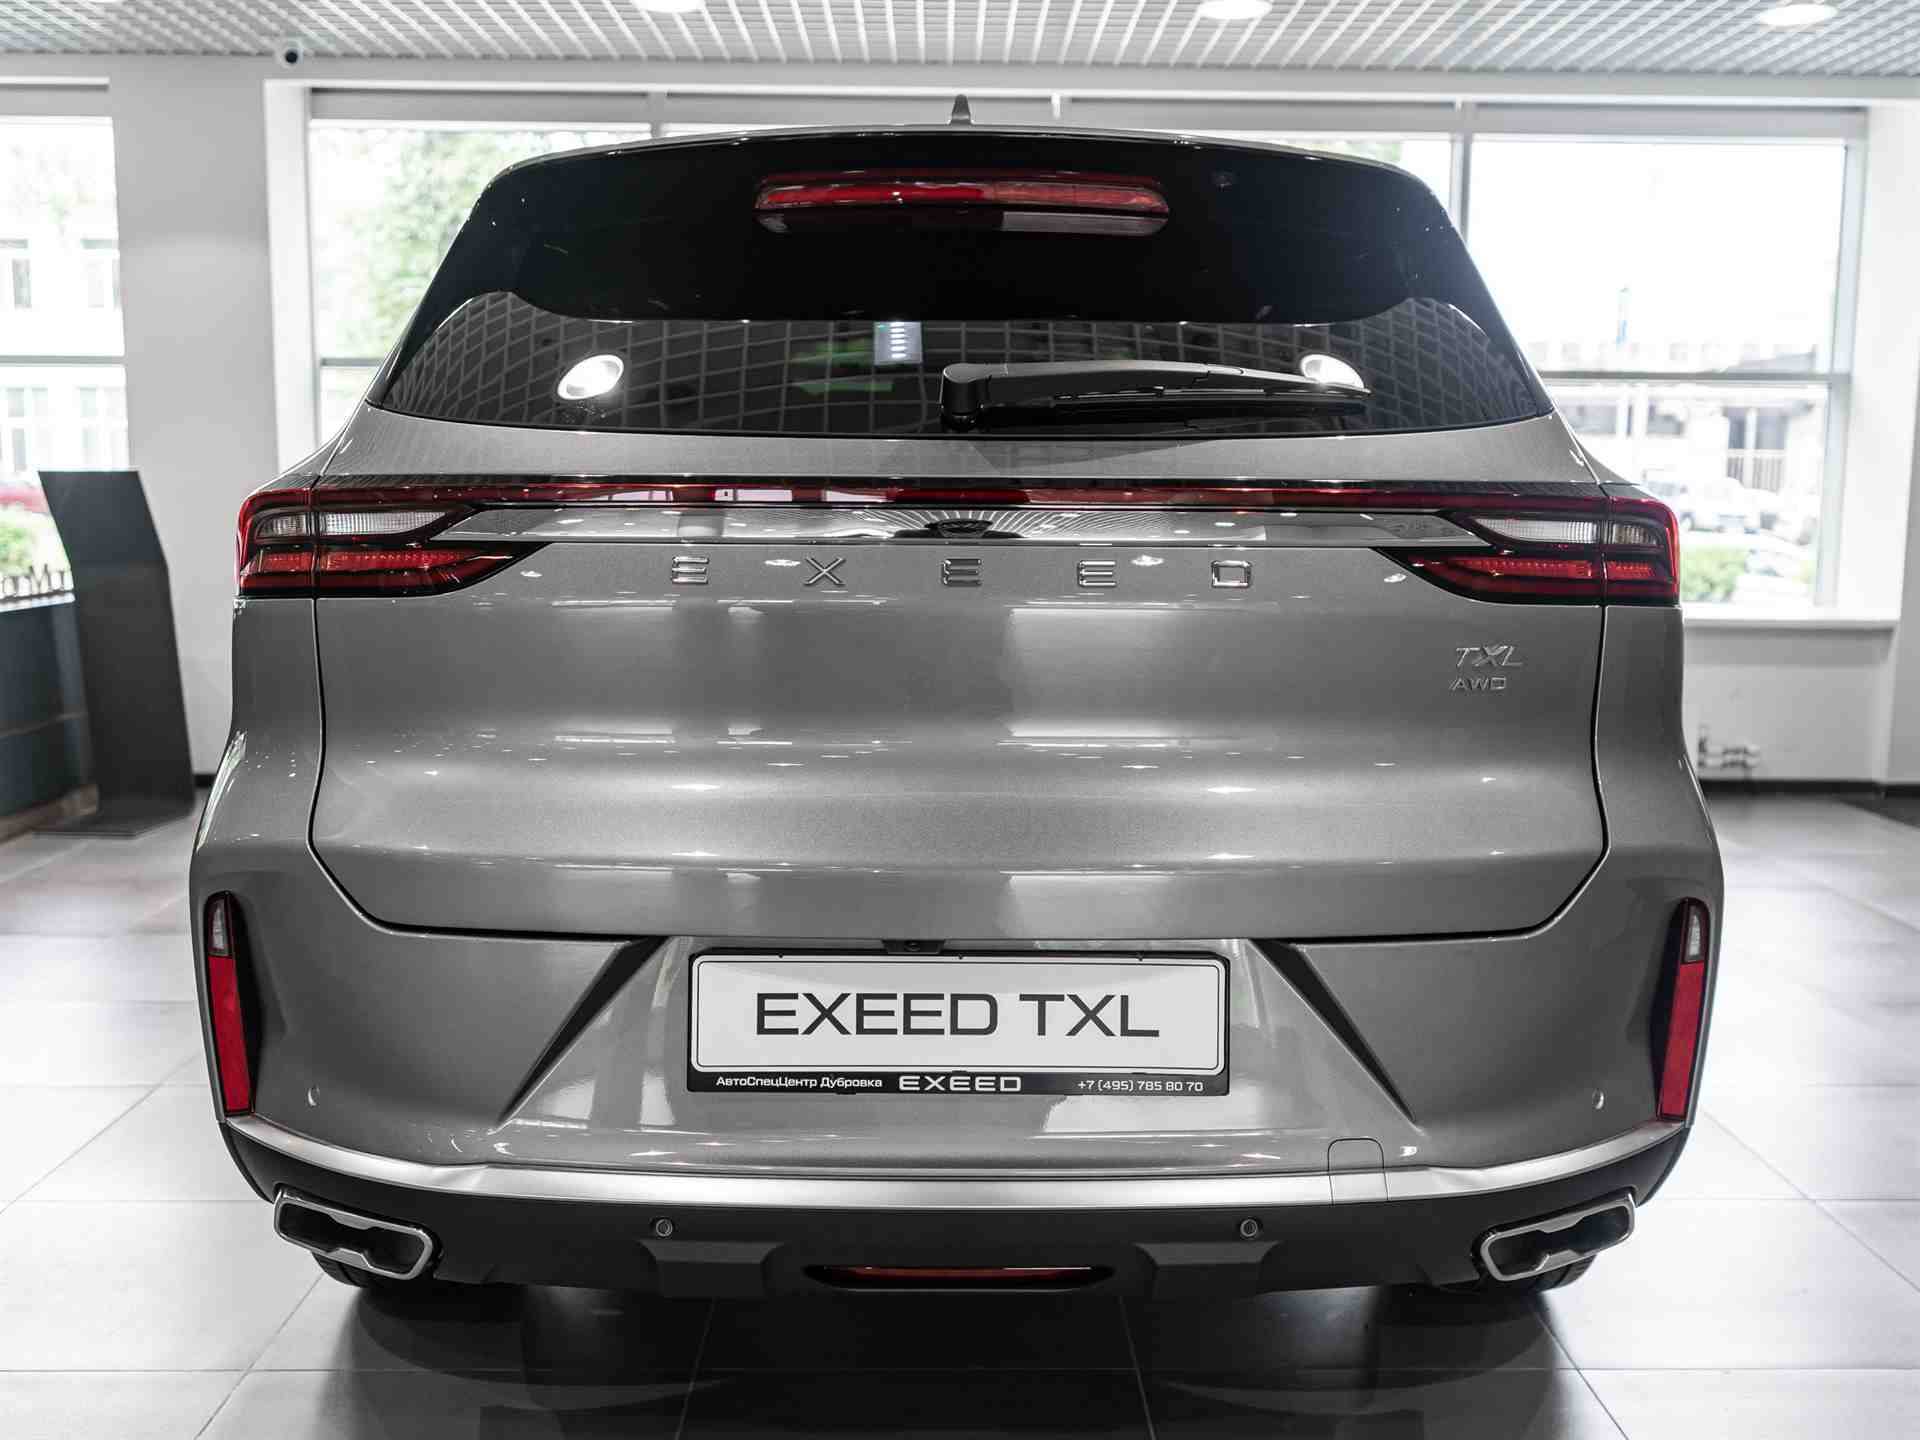 EXEED TXL Sport Edition 2.0 7DCT 4WD